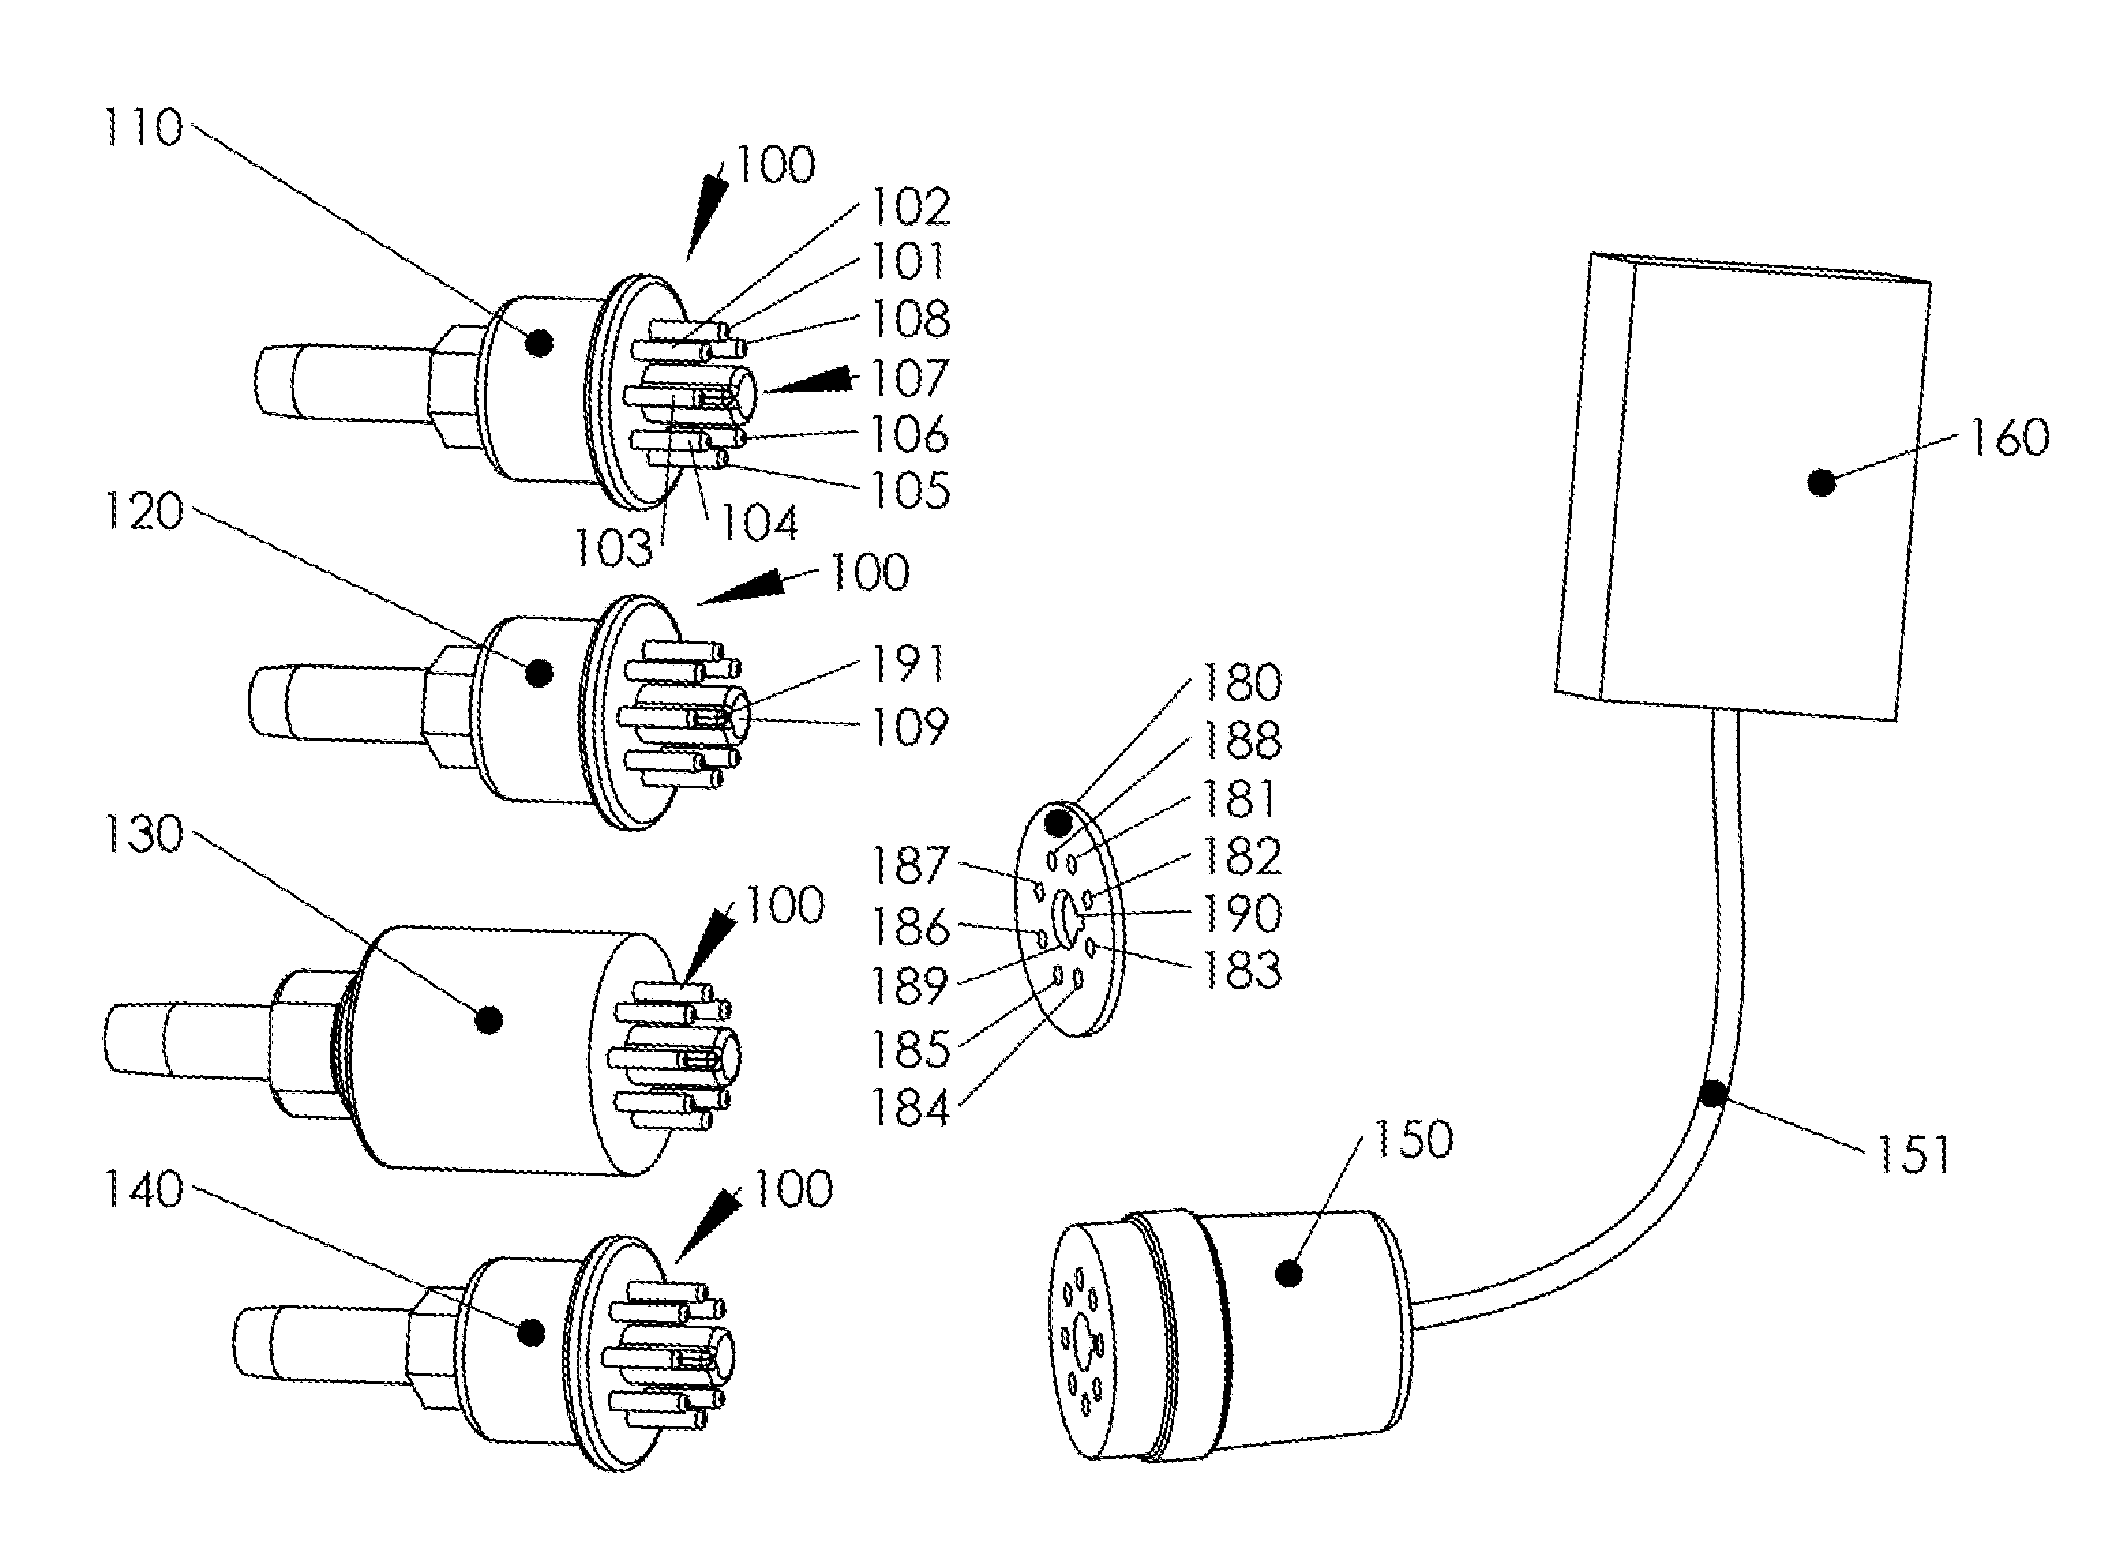 Vacuum measuring device with interchangeable sensors